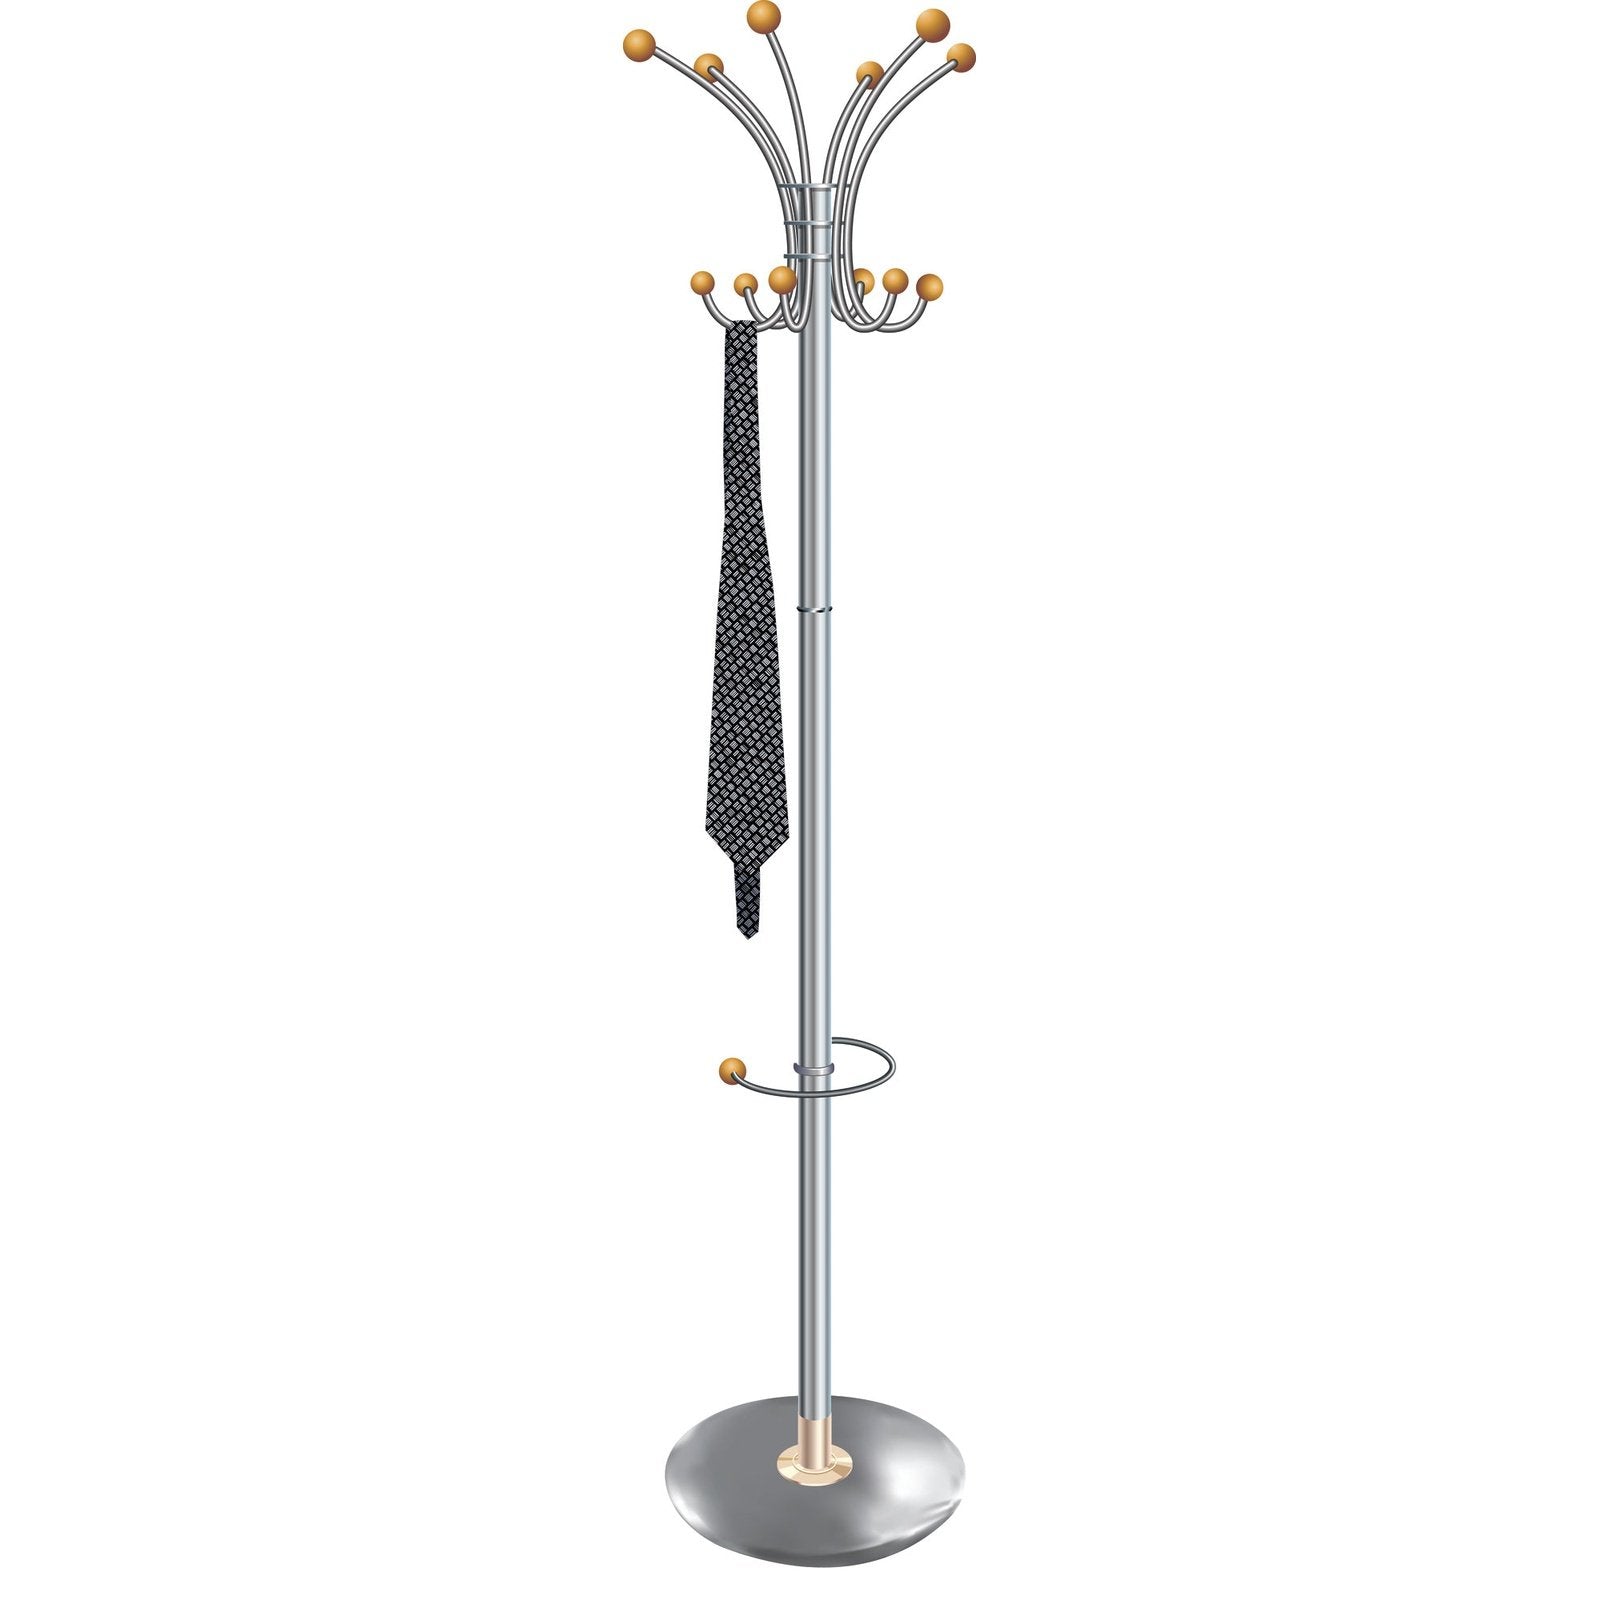 Dynamic City Coat Stand - Metal Self-Assembly 1780mm Height, 380mm Width & Depth - 1 Year Guarantee